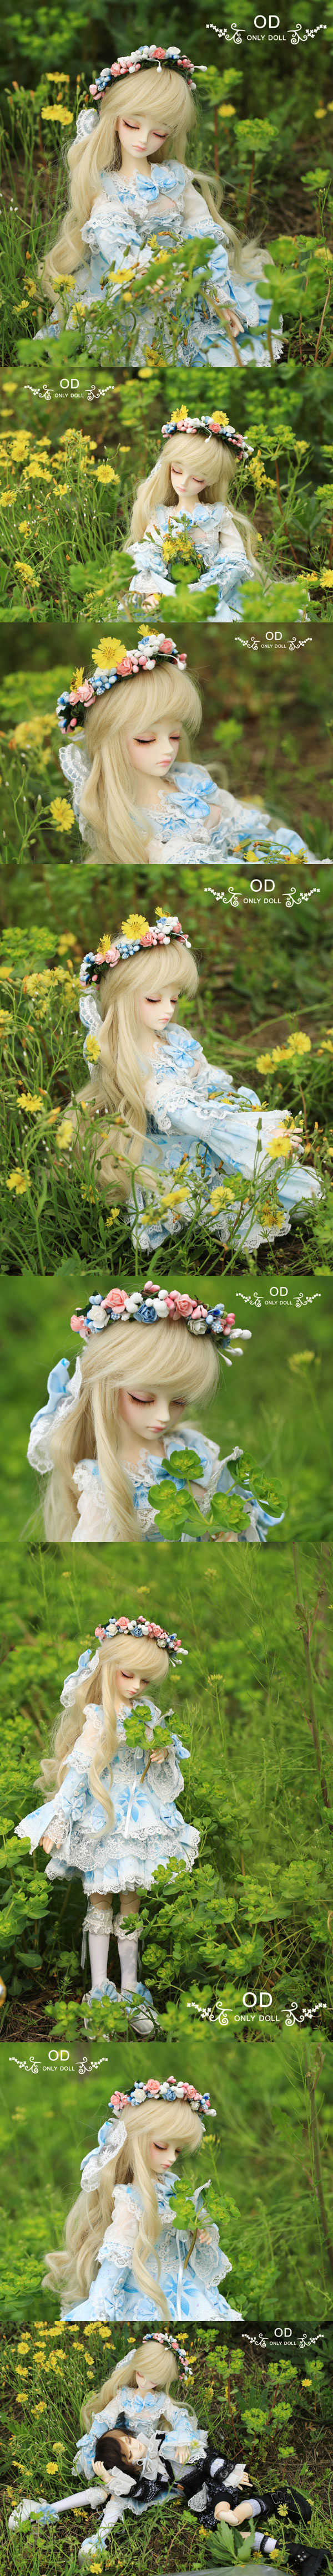 BJD Ting(Eyes are sleeping) Girl 43cm Boll-jointed doll